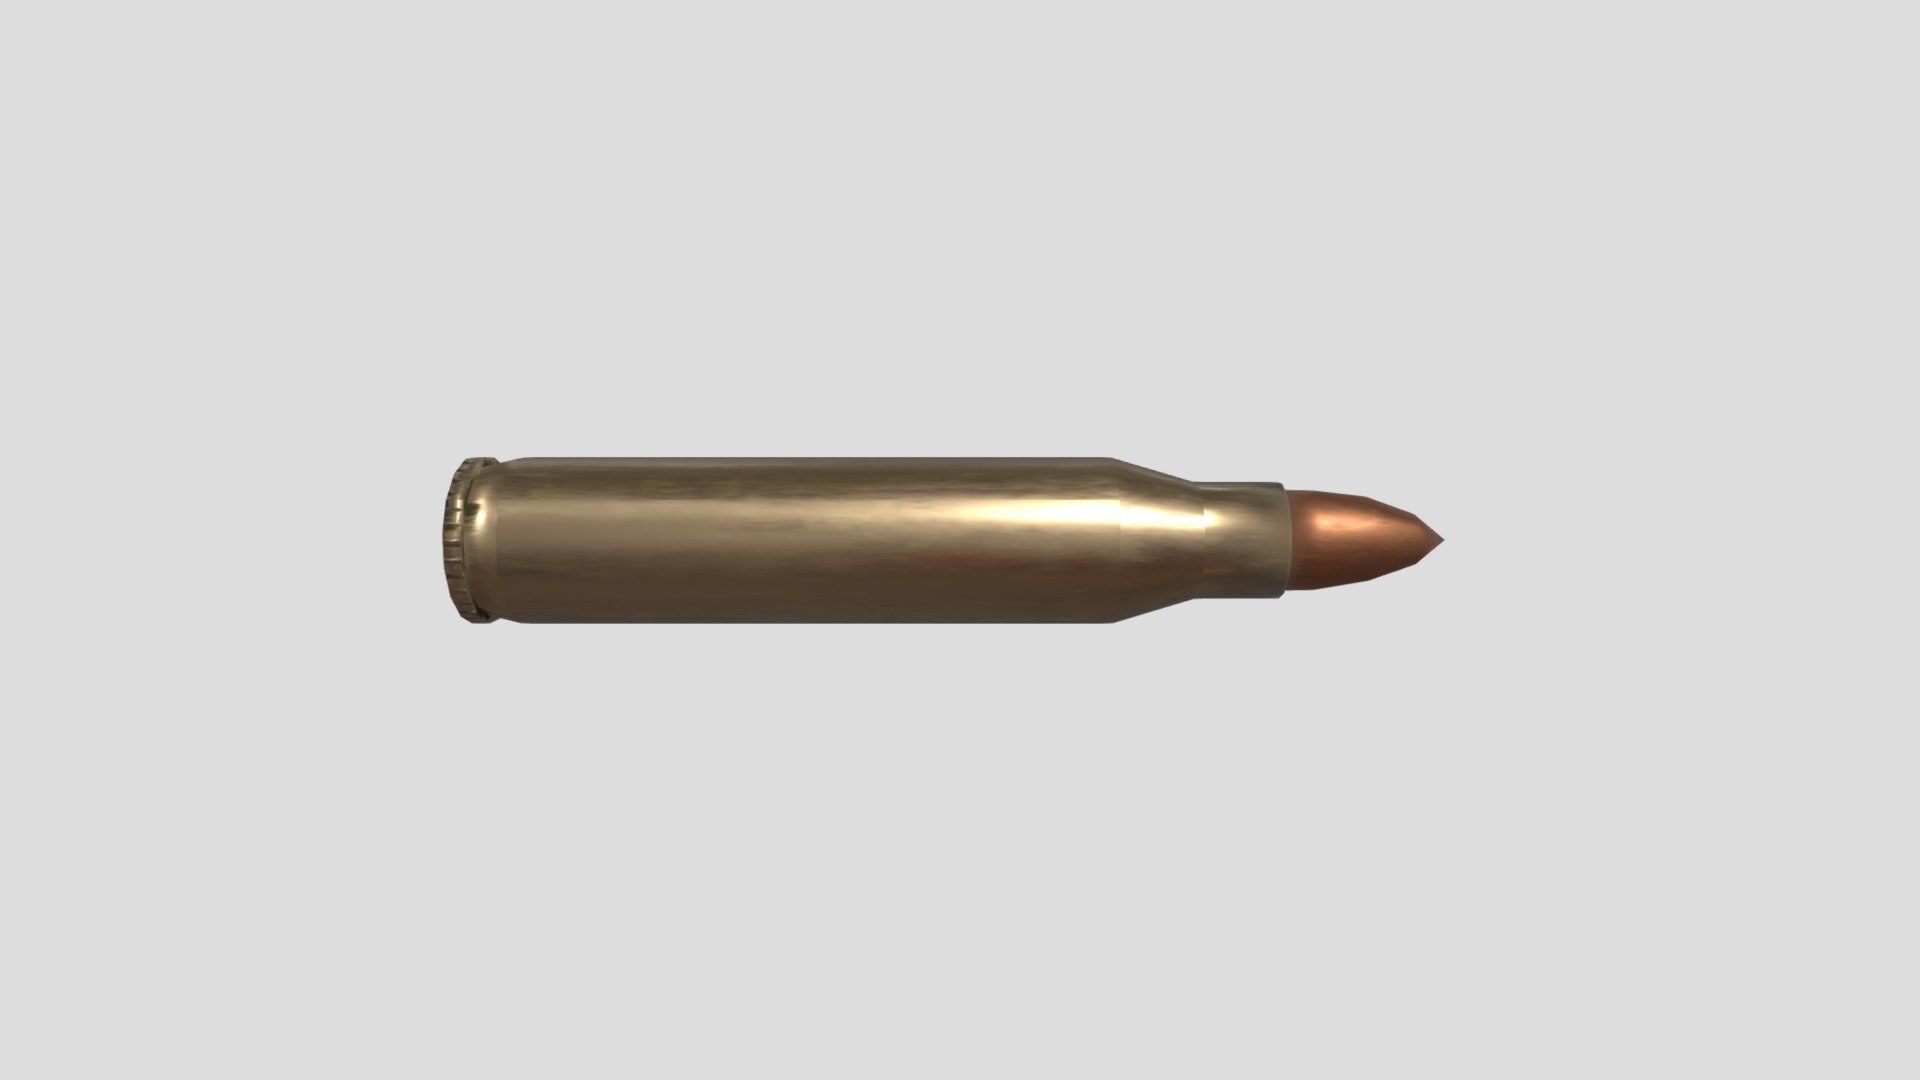 Caliber 5.56x45 mm aka .223 Remington ammo cartridge. Dimensions are roundded up, model quite Low/Semi-Low-Poly. Bullet used for weapons such as M16, M4, AUG, L85, G36, HK 416, FN SCAR, Tavor, FAMAS, SIG 550, FN Minimi or M249 and others. Free to use. Textured with SP 3d model